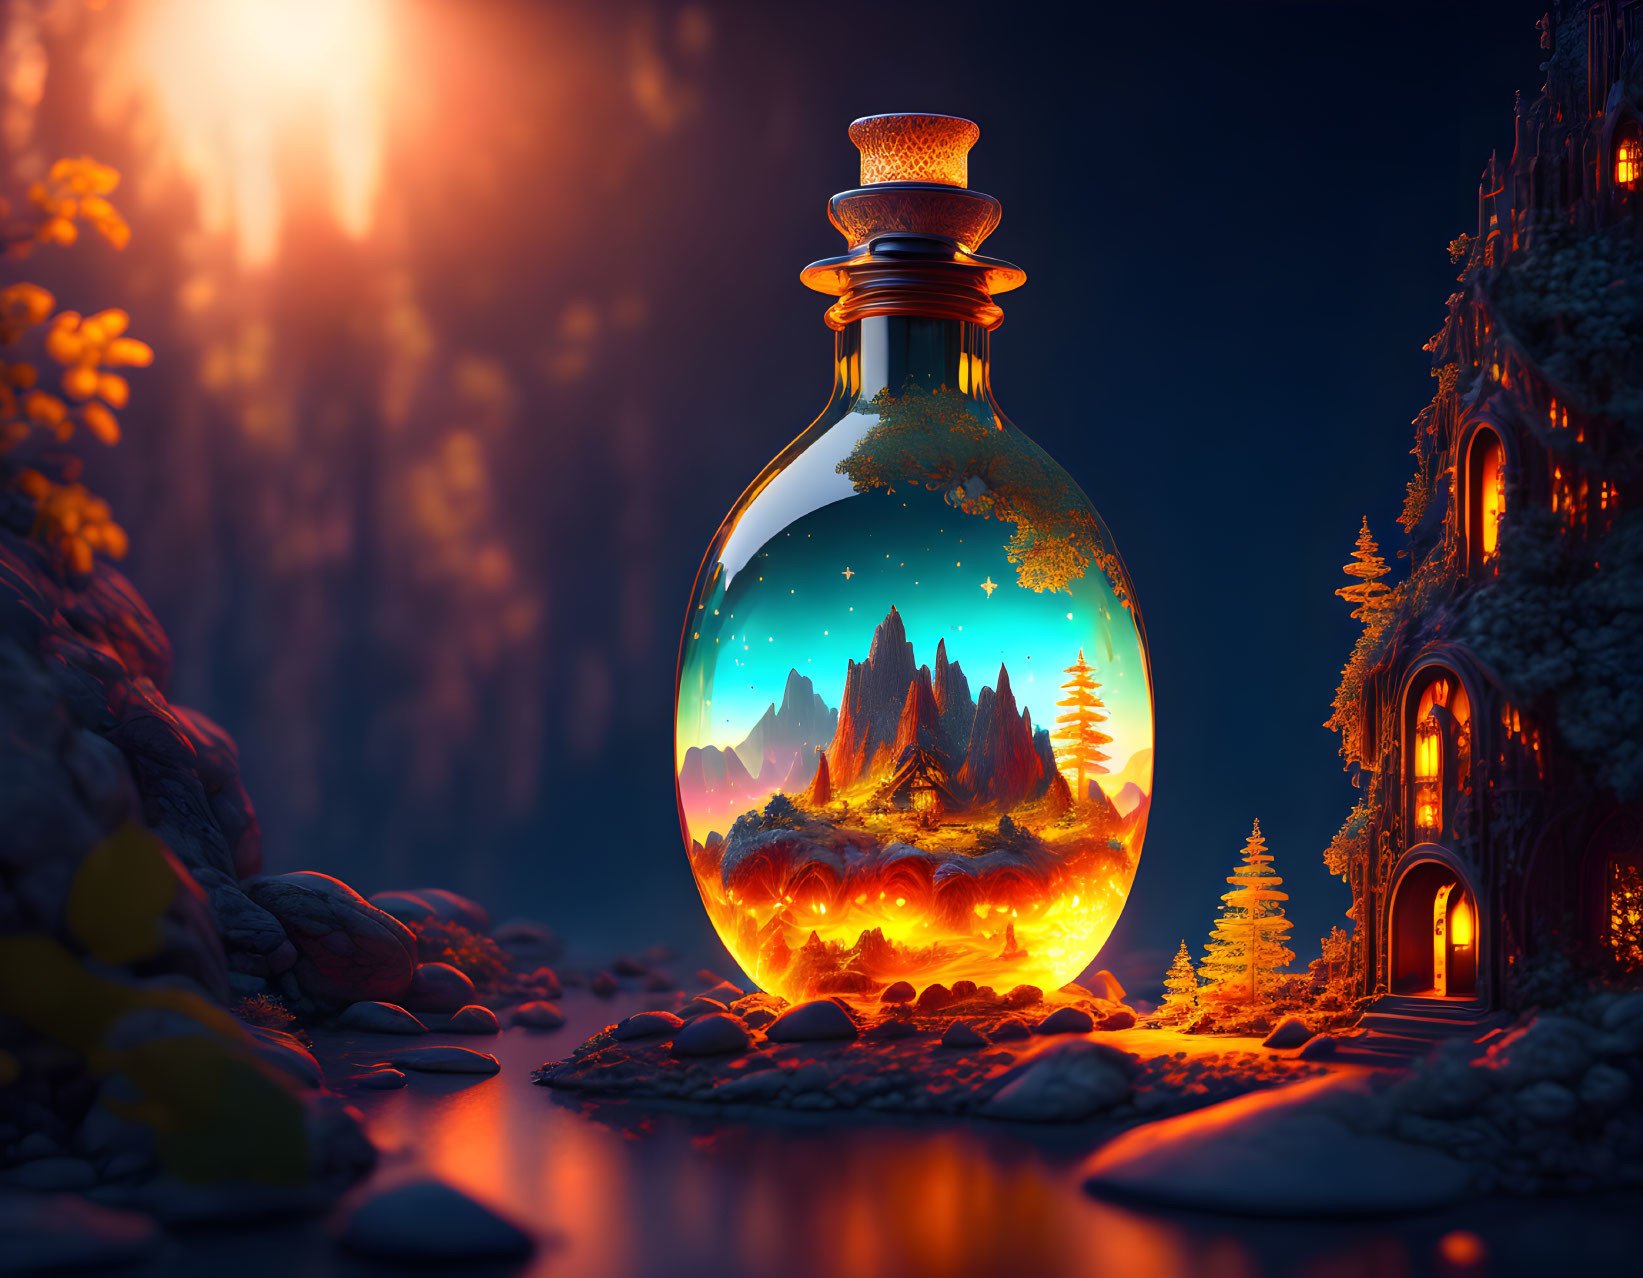 An intricate landscape trapped in a bottle, atmosp